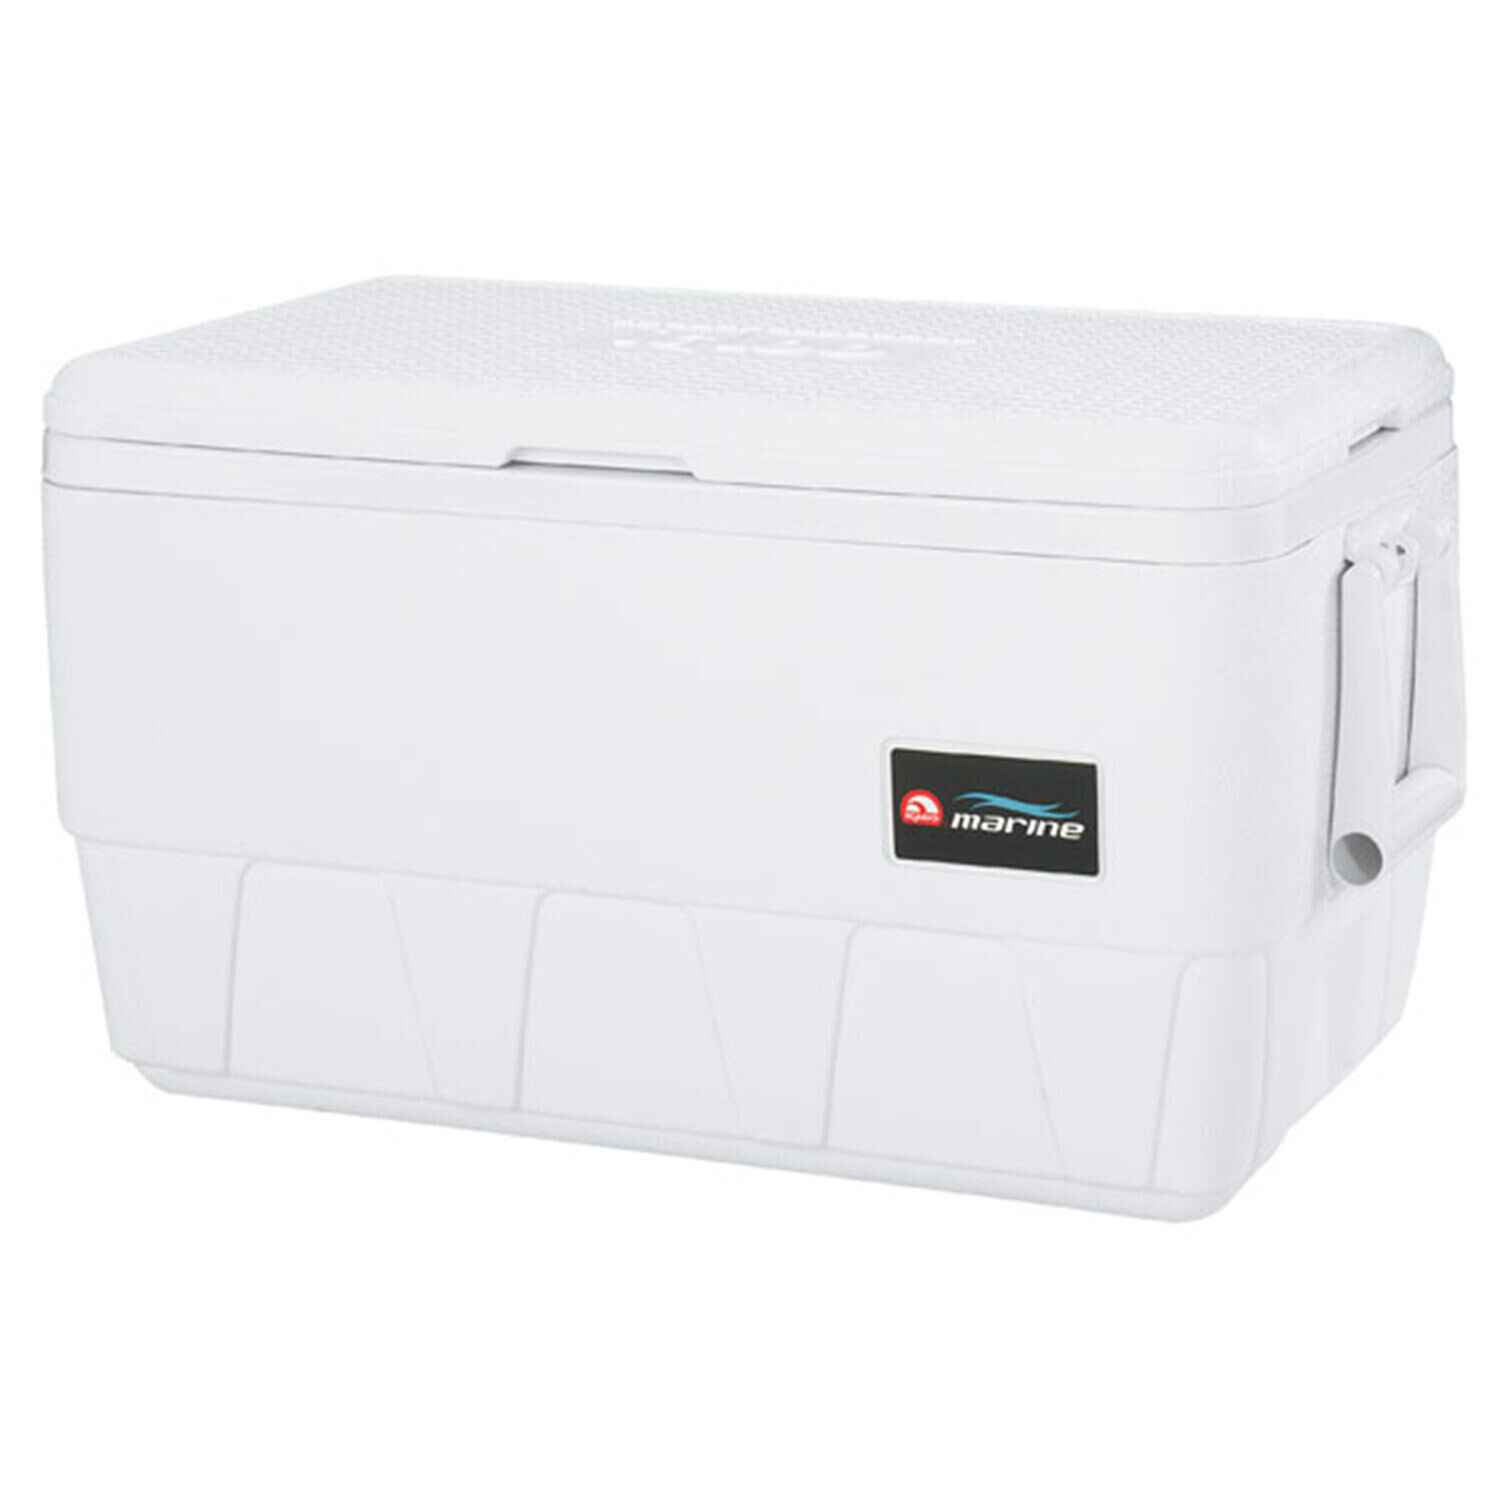 IGLOO 36QT CAMPING COOL BOX ULTRA 34L MARINE ICE CHEST COOLER *FAST DELIVERY* 